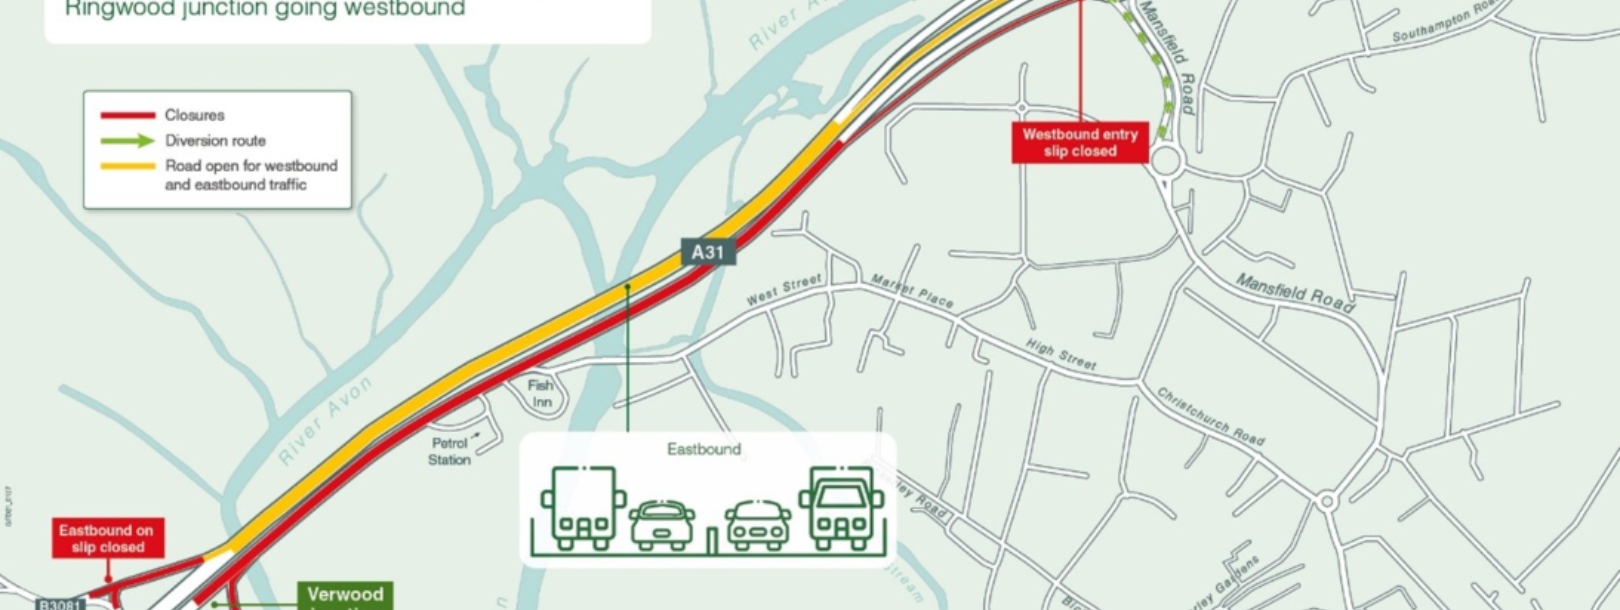 A31 Ringwood Bridge Replacement and Widening Scheme